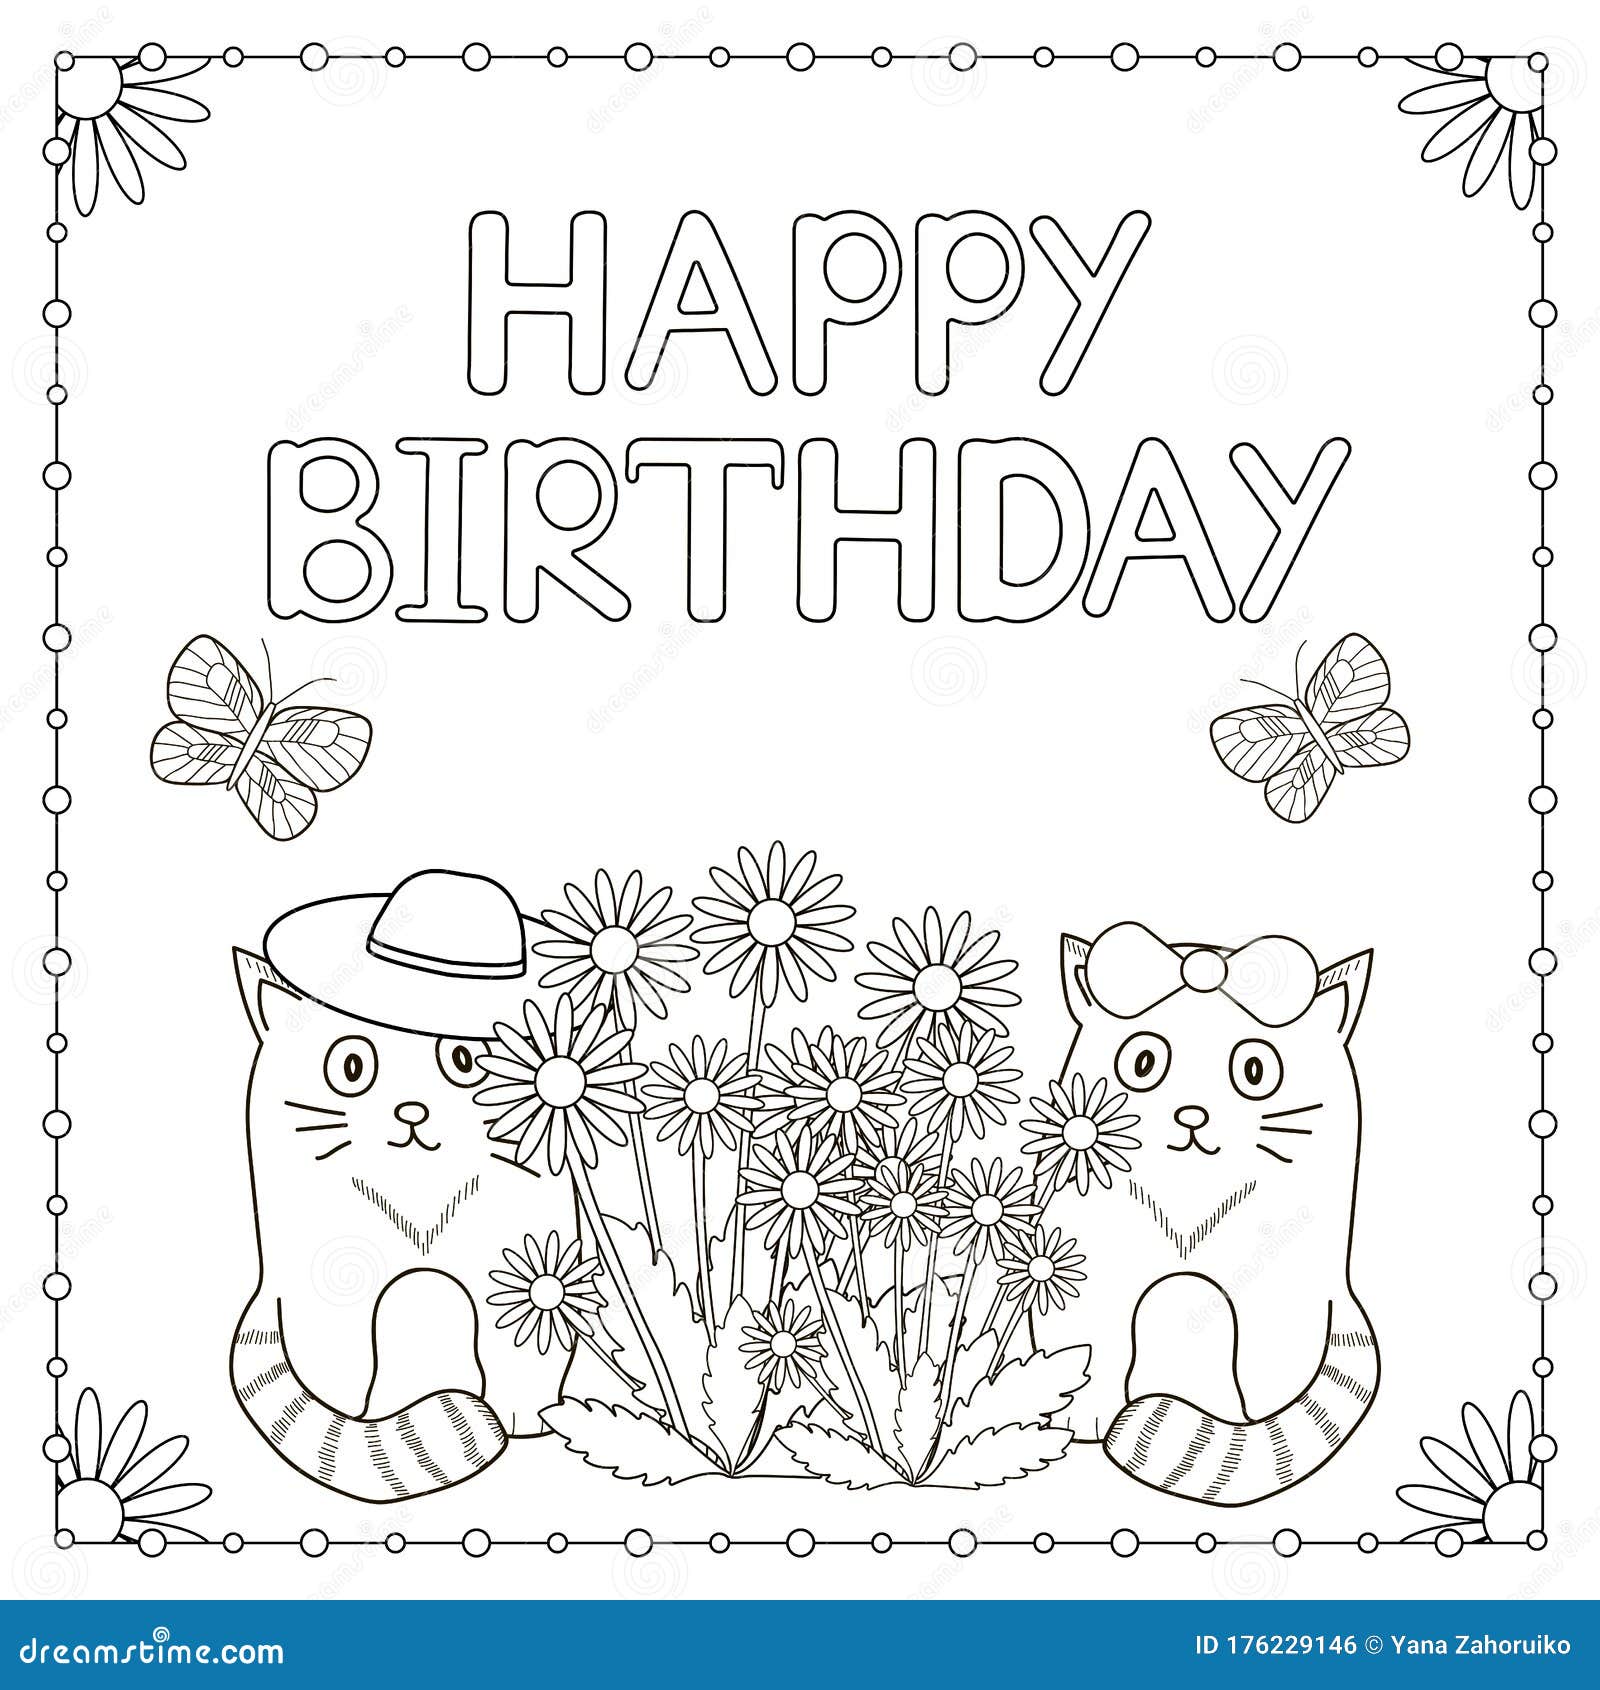 Happy Birthday Card with Flowers, Cats and Butterflies. Coloring ...